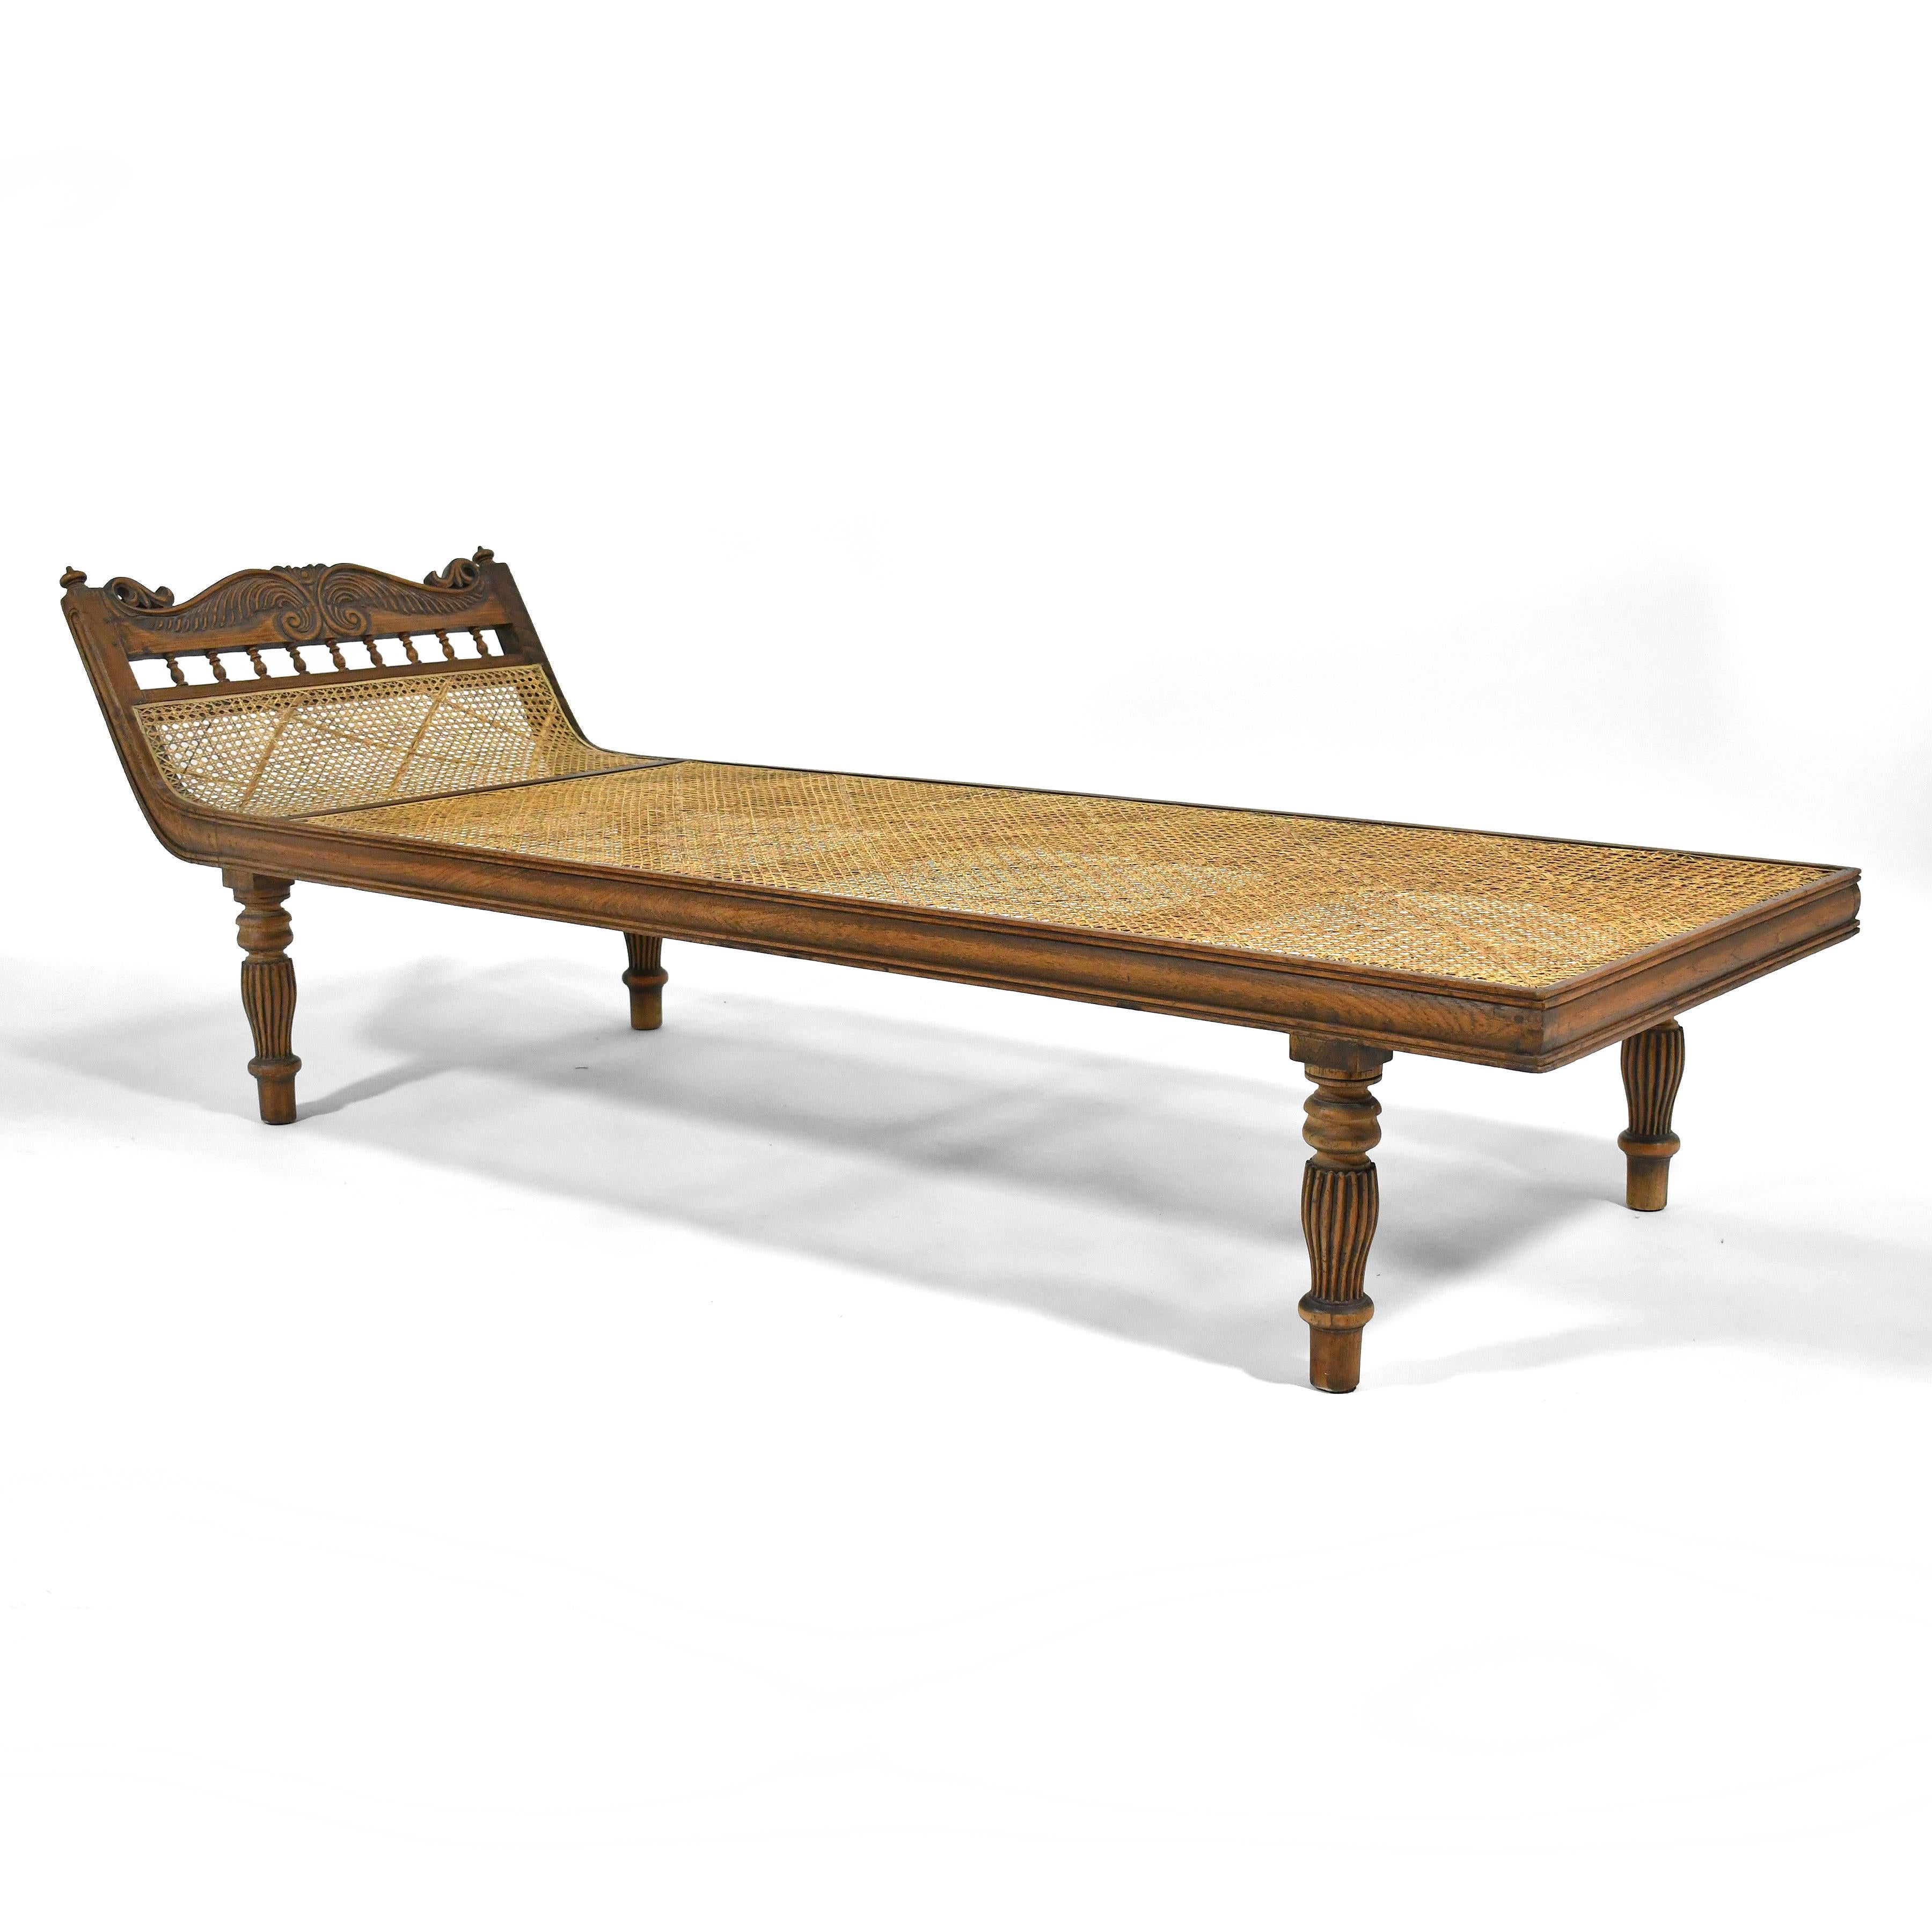 This striking chaise is long, lean and luxurious. A teak frame with lovely carved details and a woven cane support offers a platform for lounging, reading and relaxing. Made more comfortable by a beautiful woven quilted pad and pillow.

This